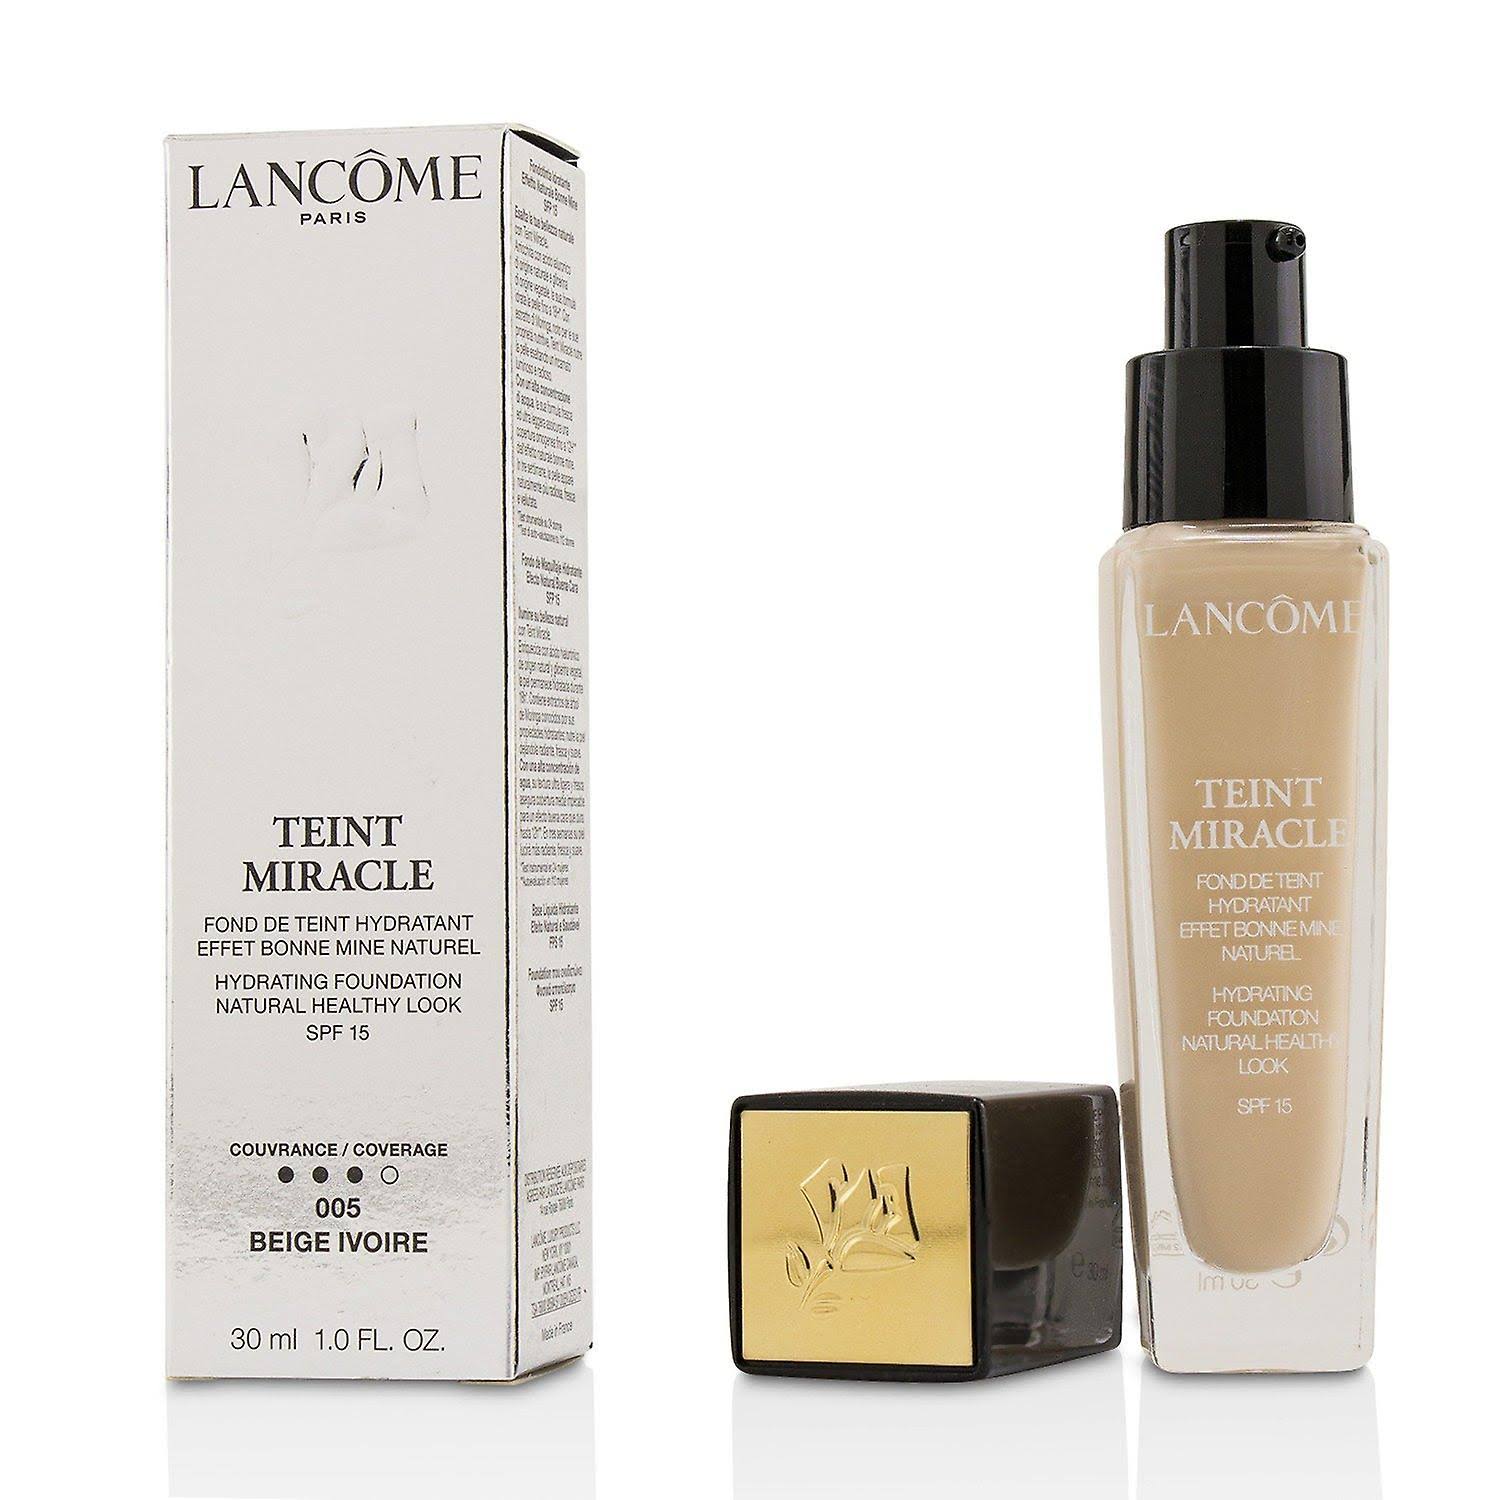 Lancome Teint Miracle Foundation - 005 Beige, 30ml